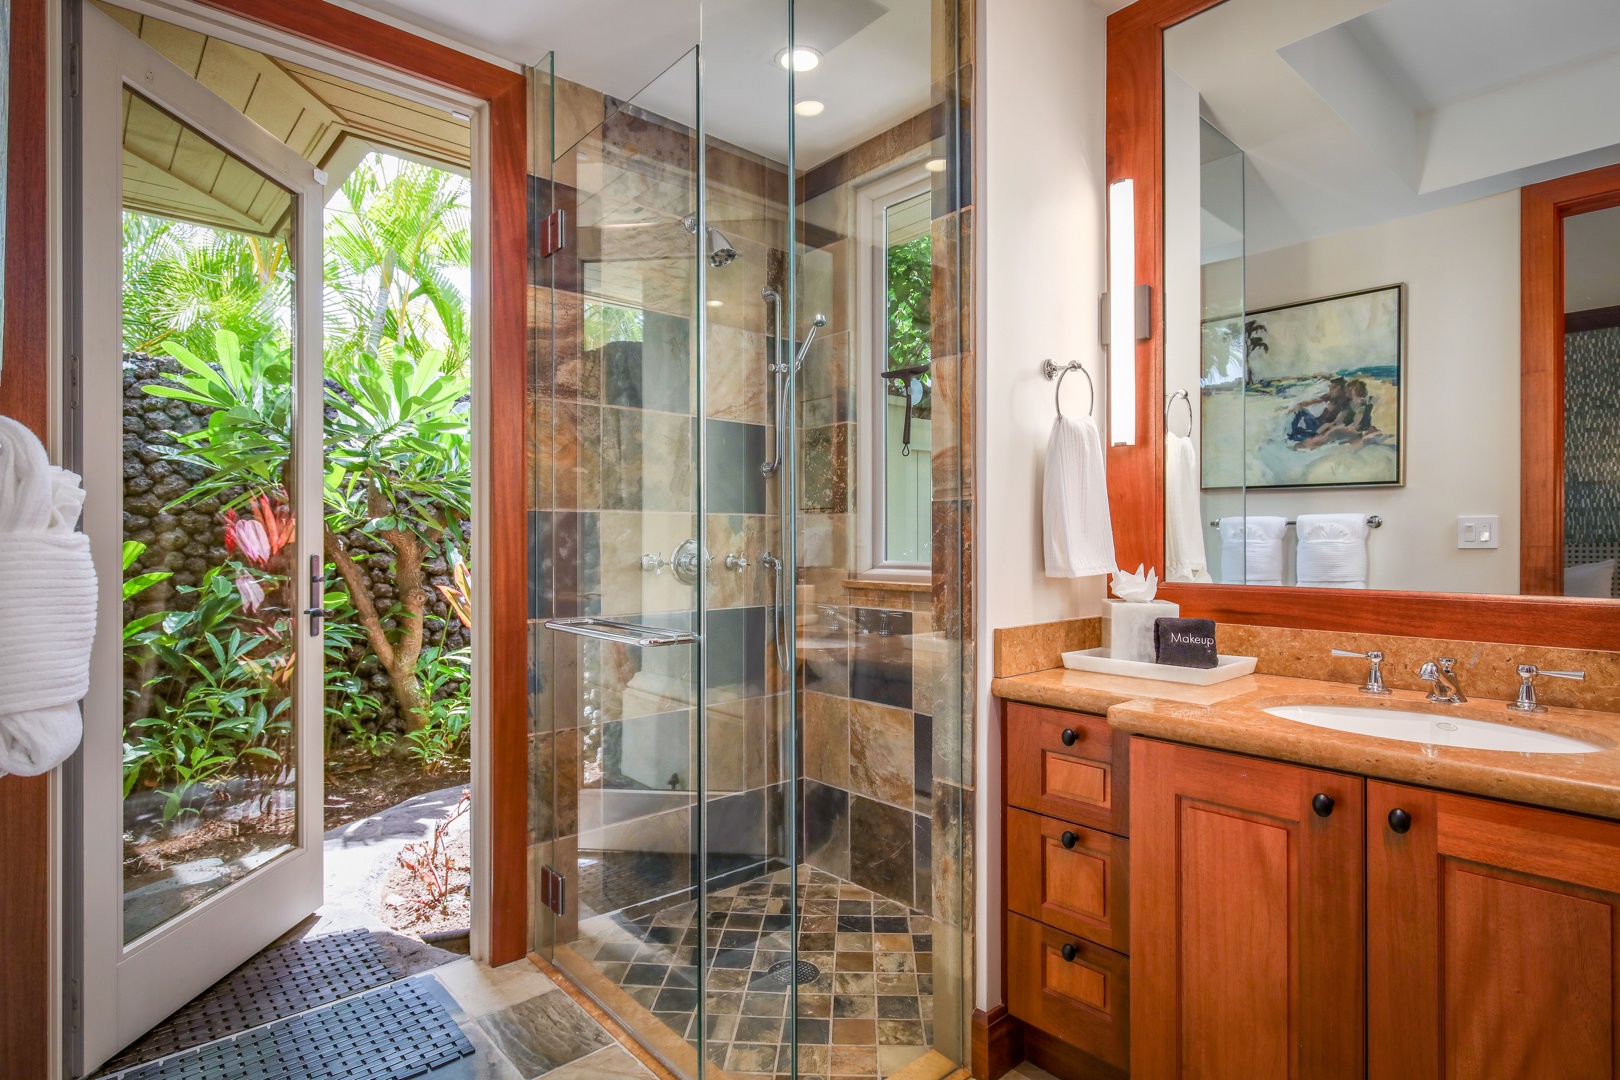 Kailua Kona Vacation Rentals, 4BD Hainoa Estate (122) at Four Seasons Resort at Hualalai - Full en suite bath in Guest Room 3 with walk-in shower and outdoor shower garden.